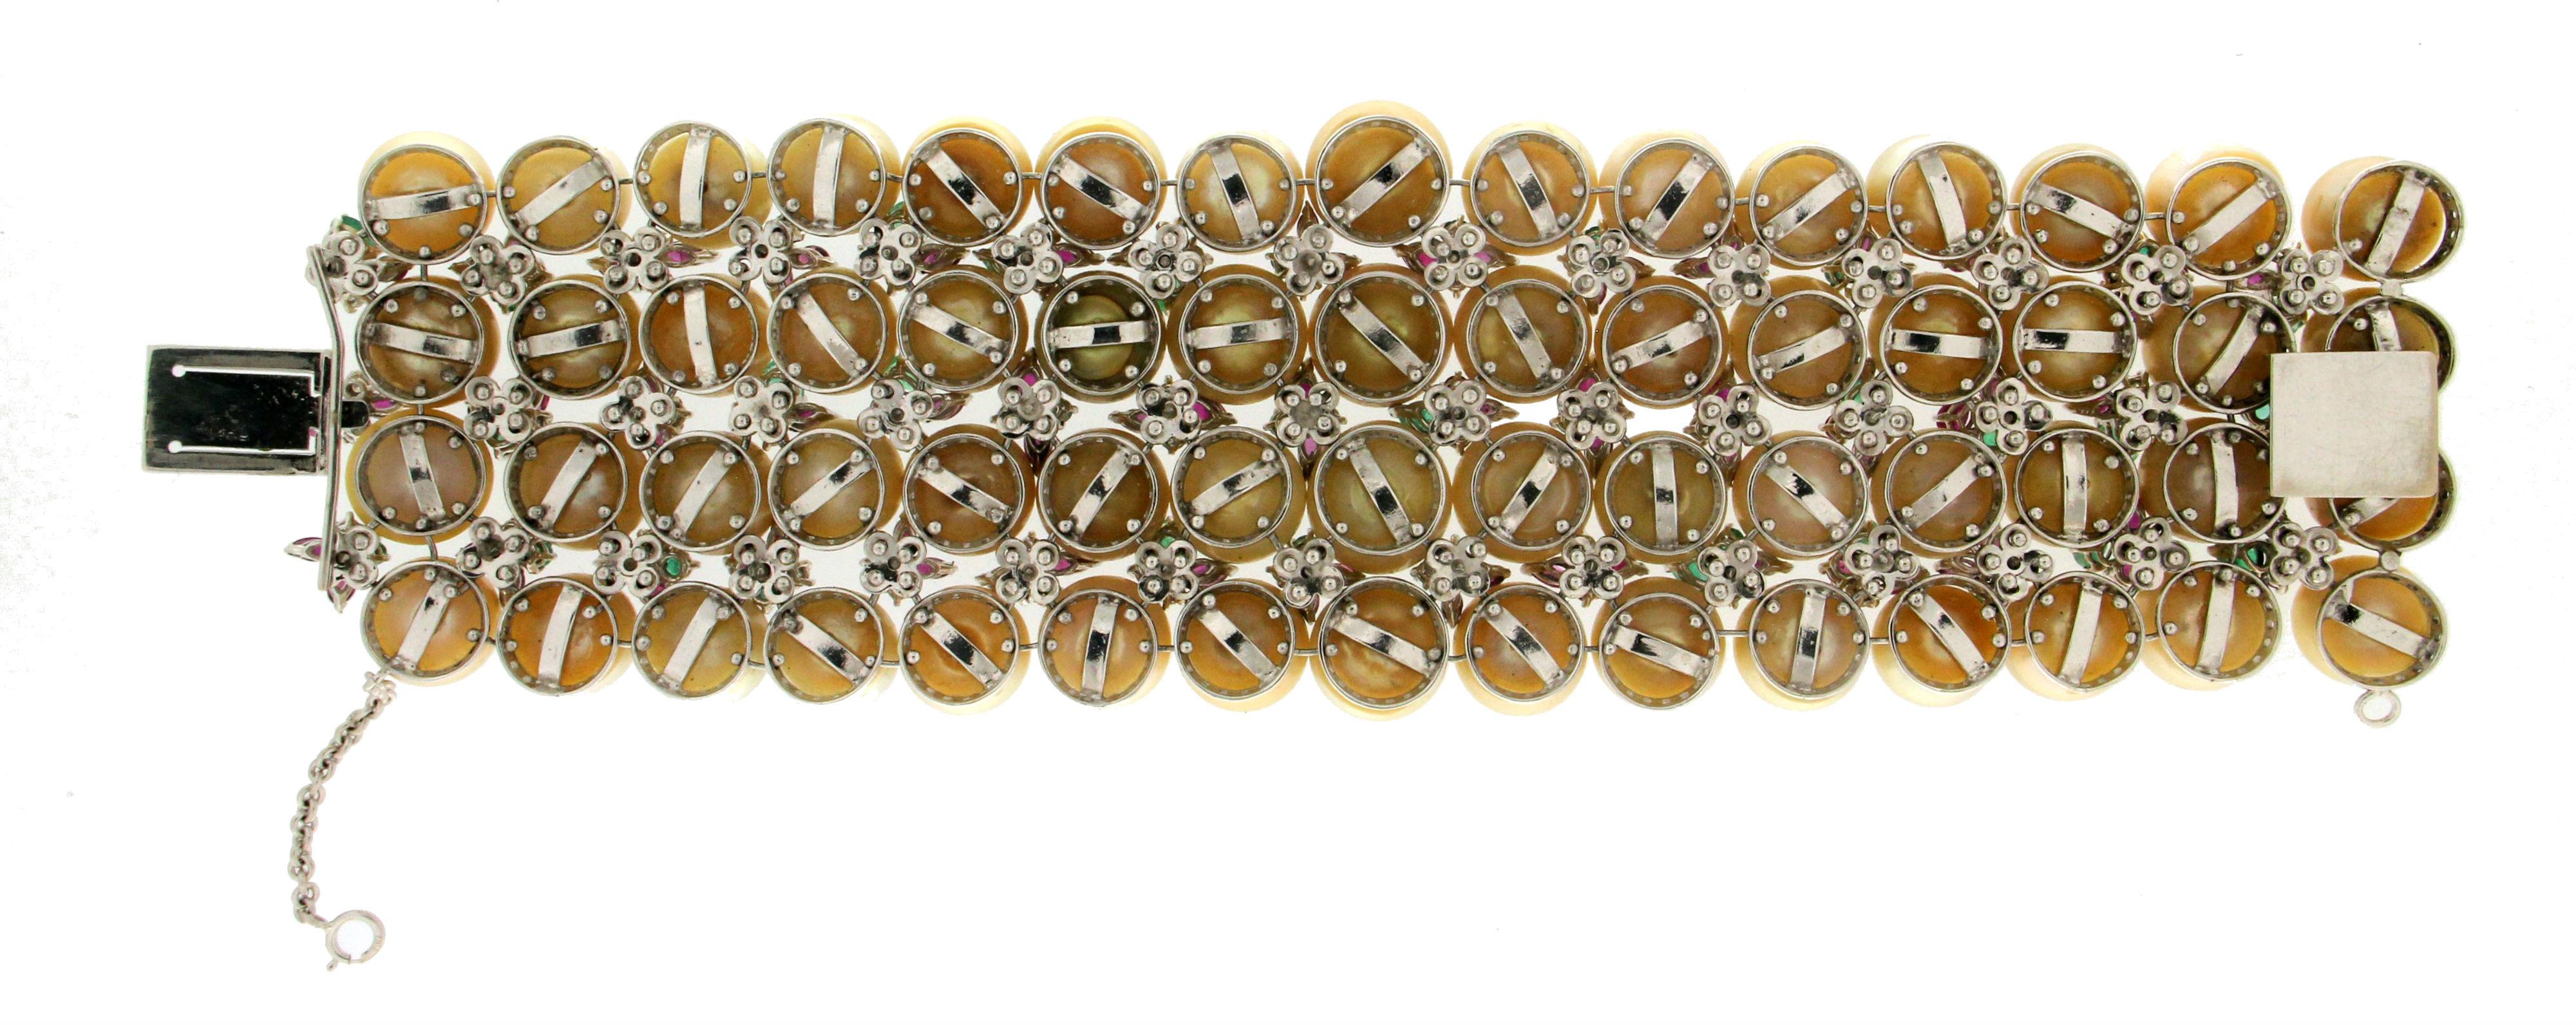 Handcraft Pearls 18 Karat White Gold Emeralds Ruby Diamonds Cuff Bracelet In New Condition For Sale In Marcianise, IT